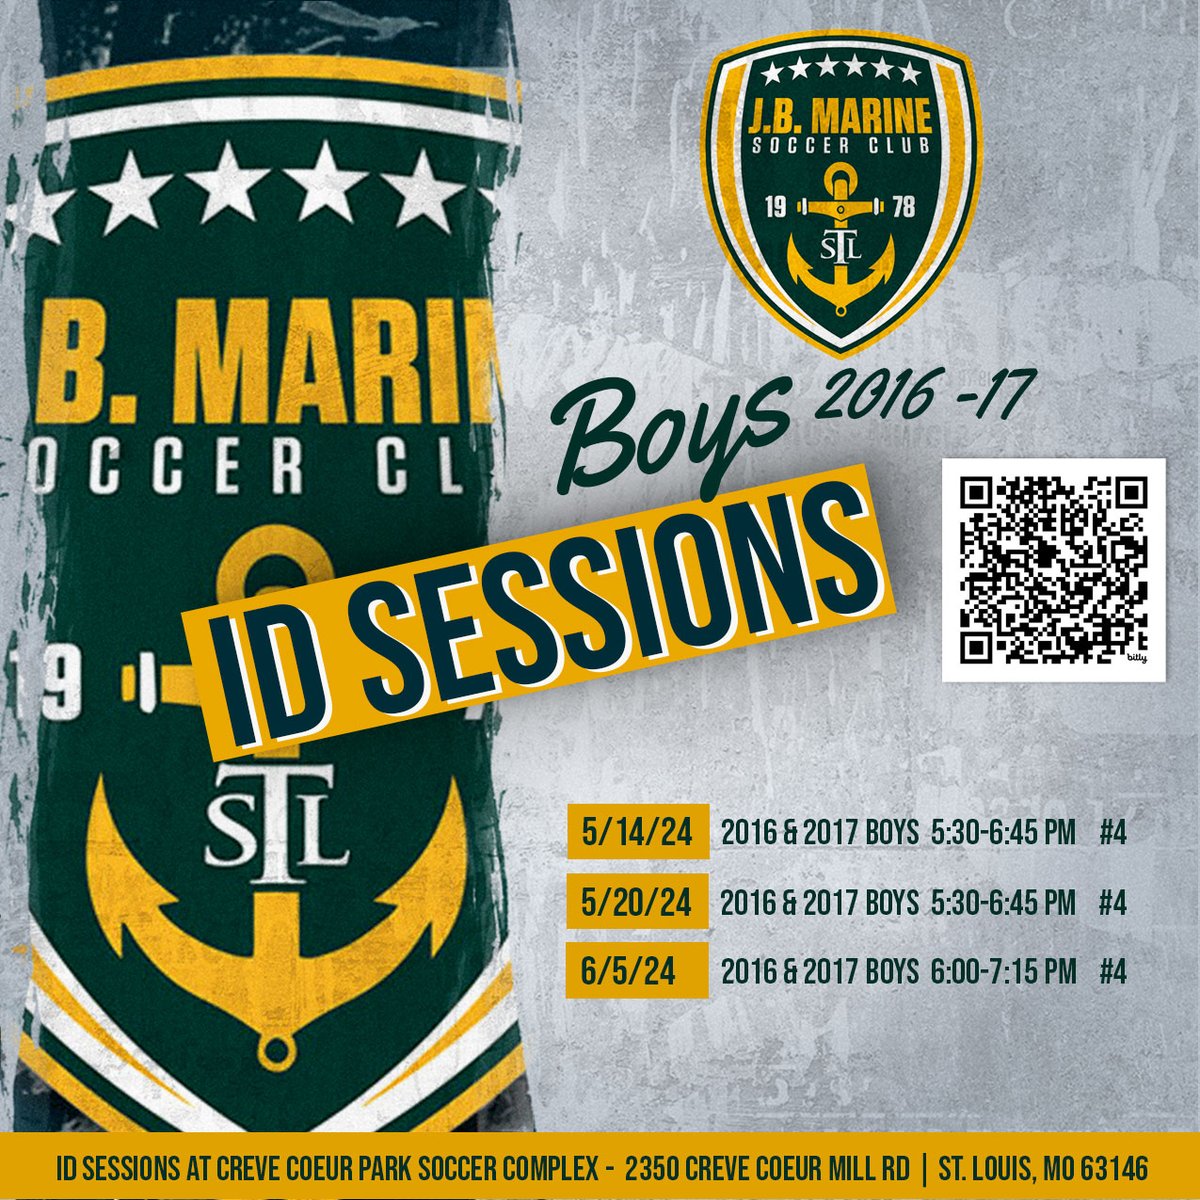 ⚽ NEW 2016 & 2017 BOYS OPEN ID SESSIONS ANNOUNCED! Check out our website today at bit.ly/JBMarineIDSess… for the latest information and how to register for ID sessions.